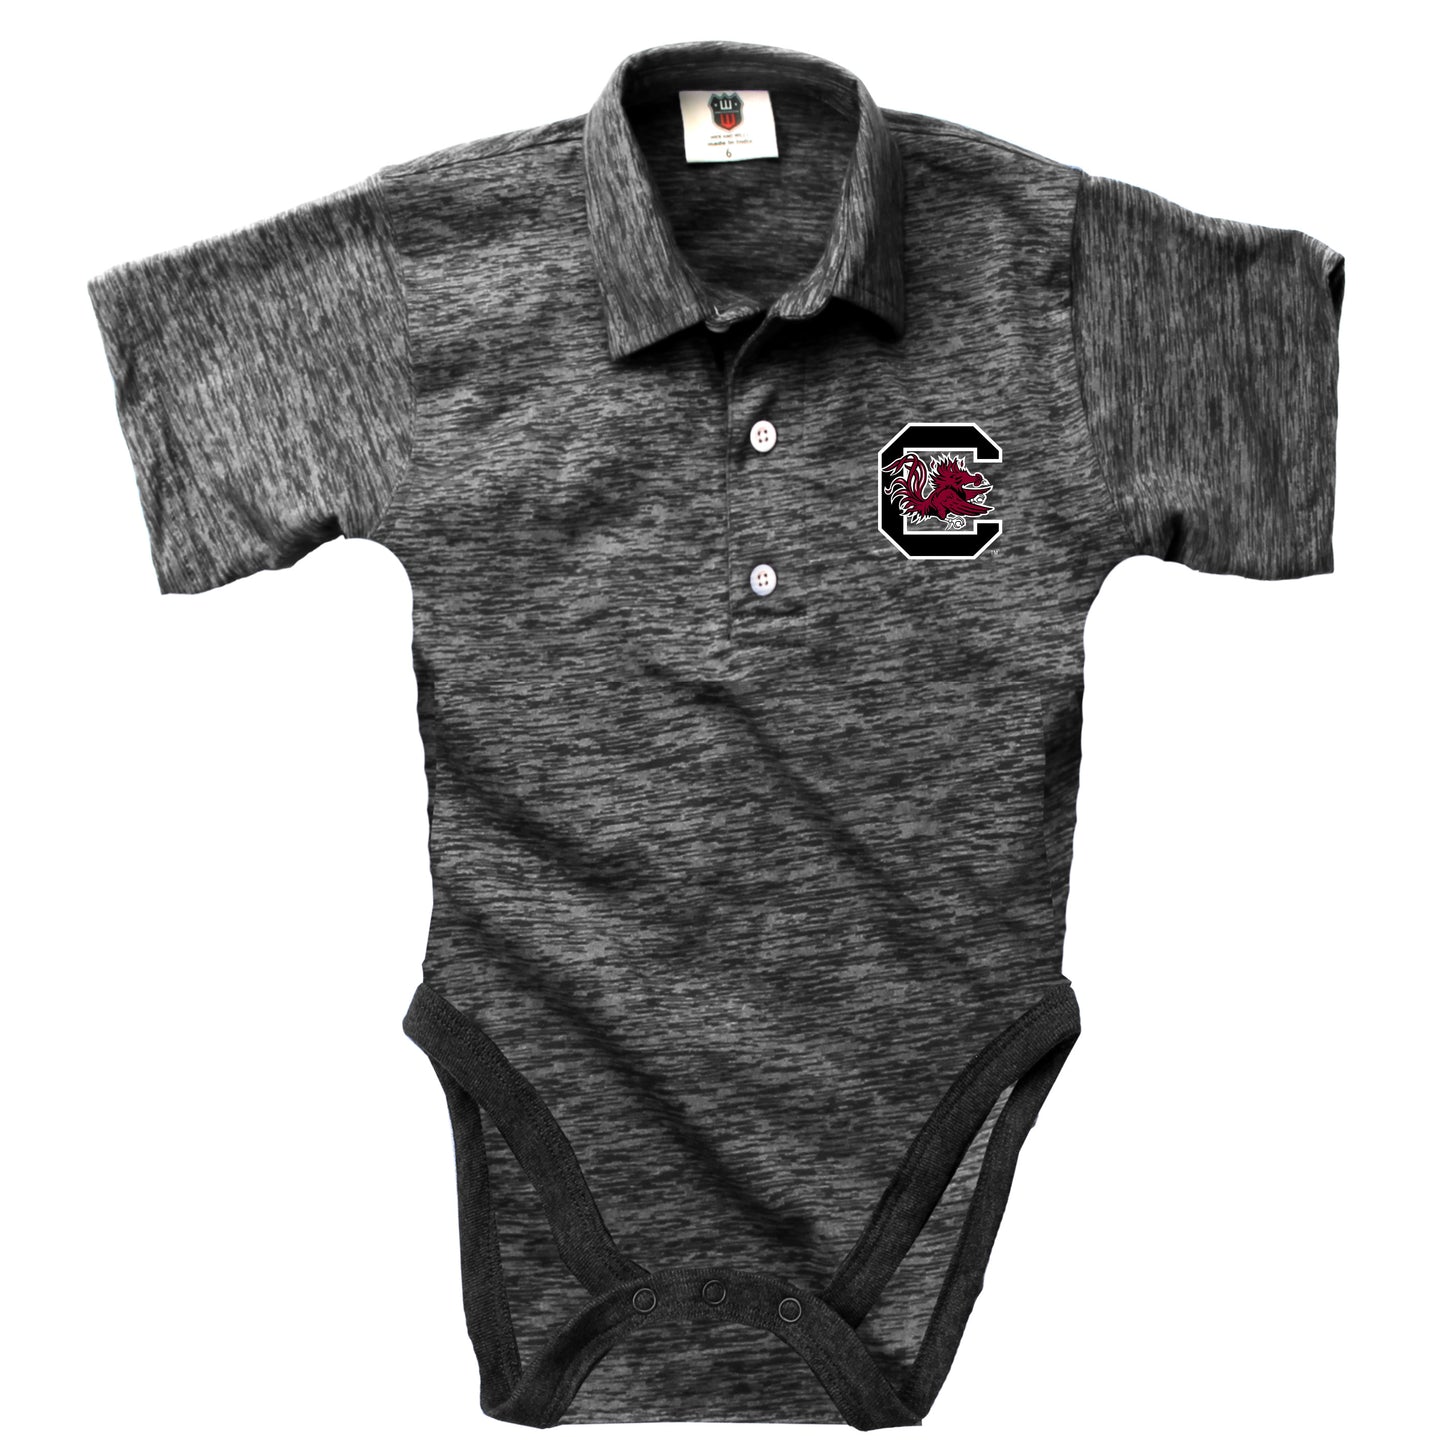 South Carolina Gamecocks Wes and Willy Infant College Cloudy Yarn One Piece Polo Bodysuit